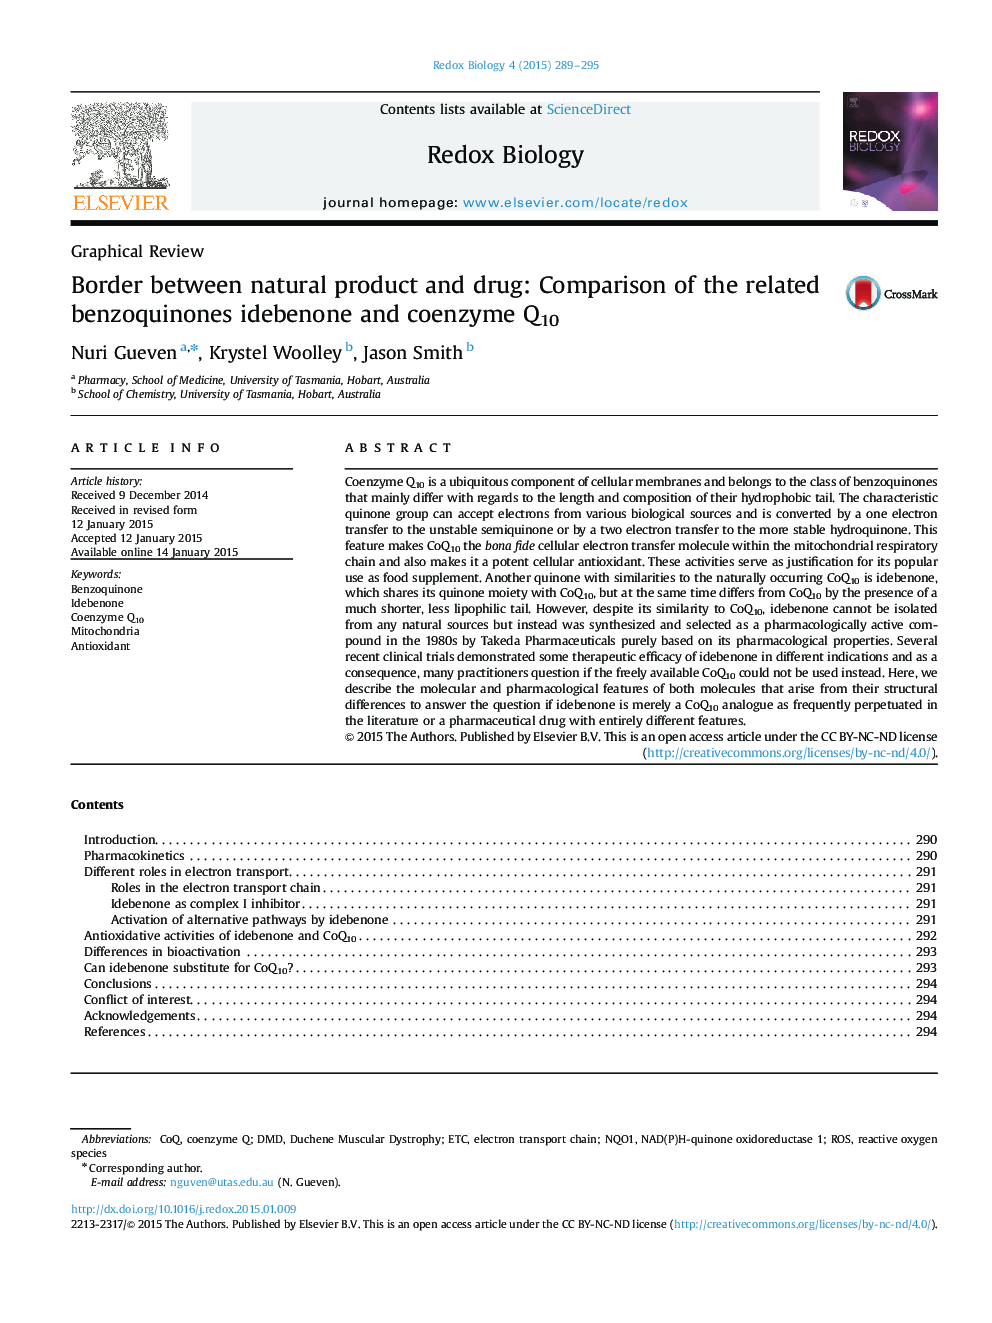 Border between natural product and drug: Comparison of the related benzoquinones idebenone and coenzyme Q10